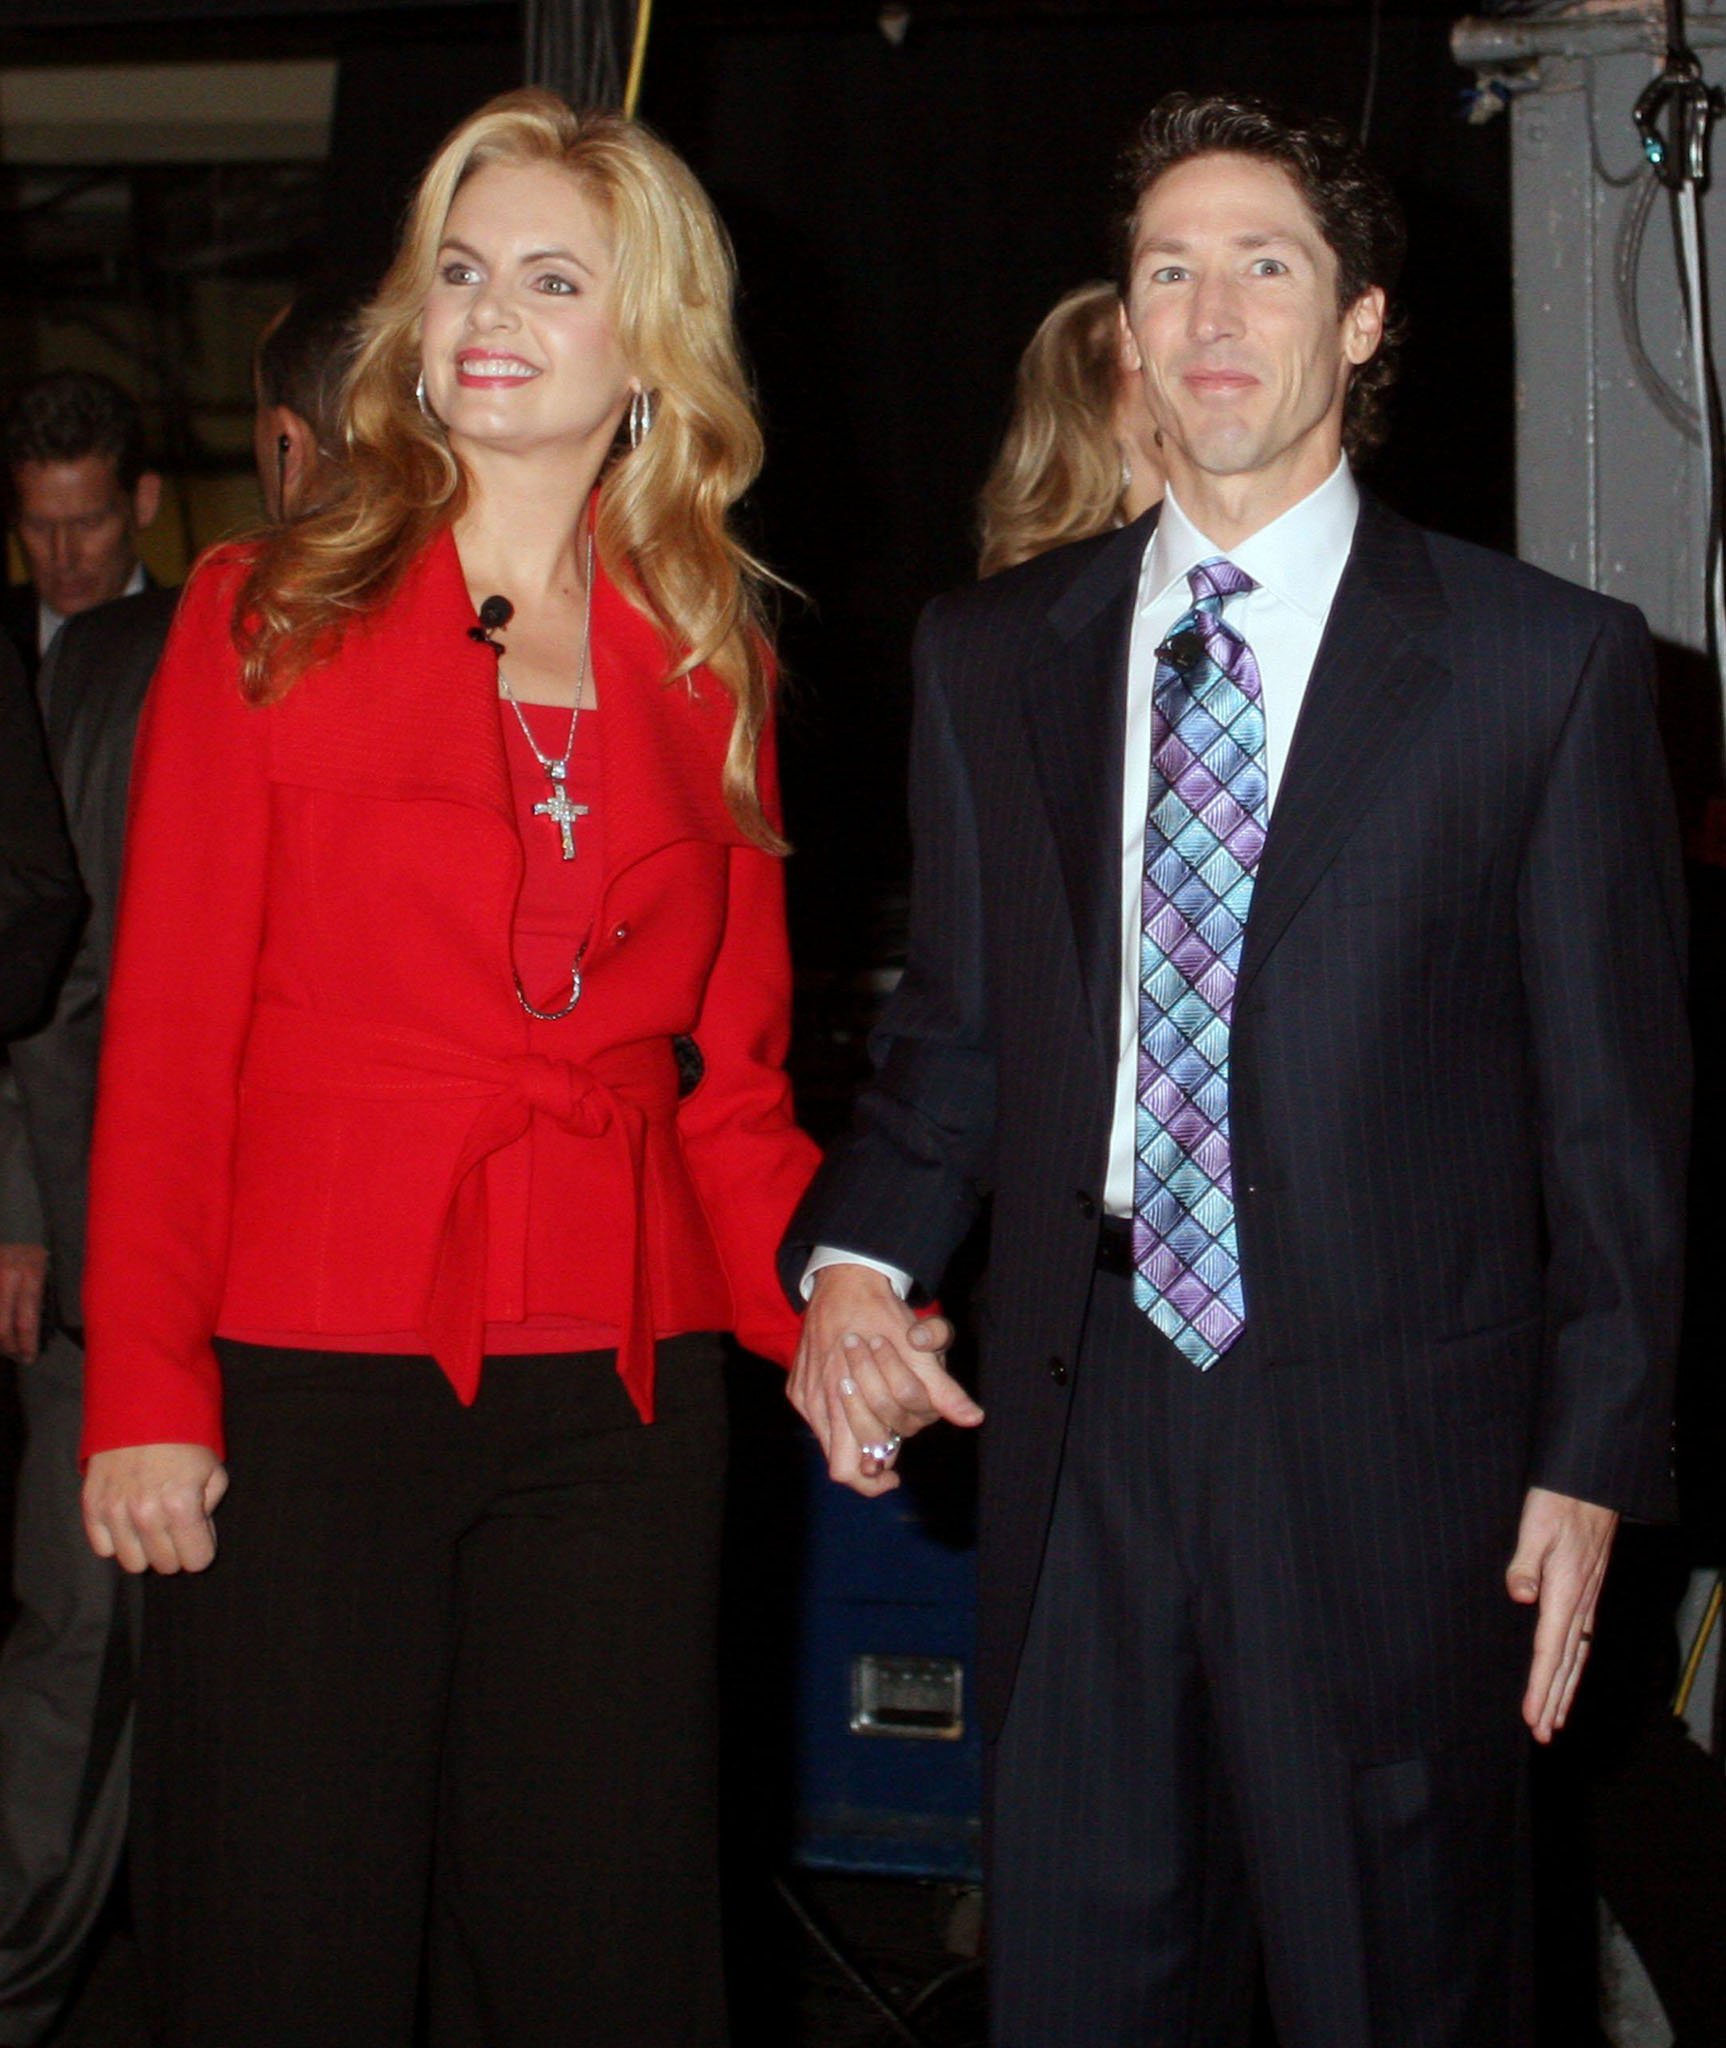 Pastor Joel and Victoria Osteen have been married since 1987 and share two children together